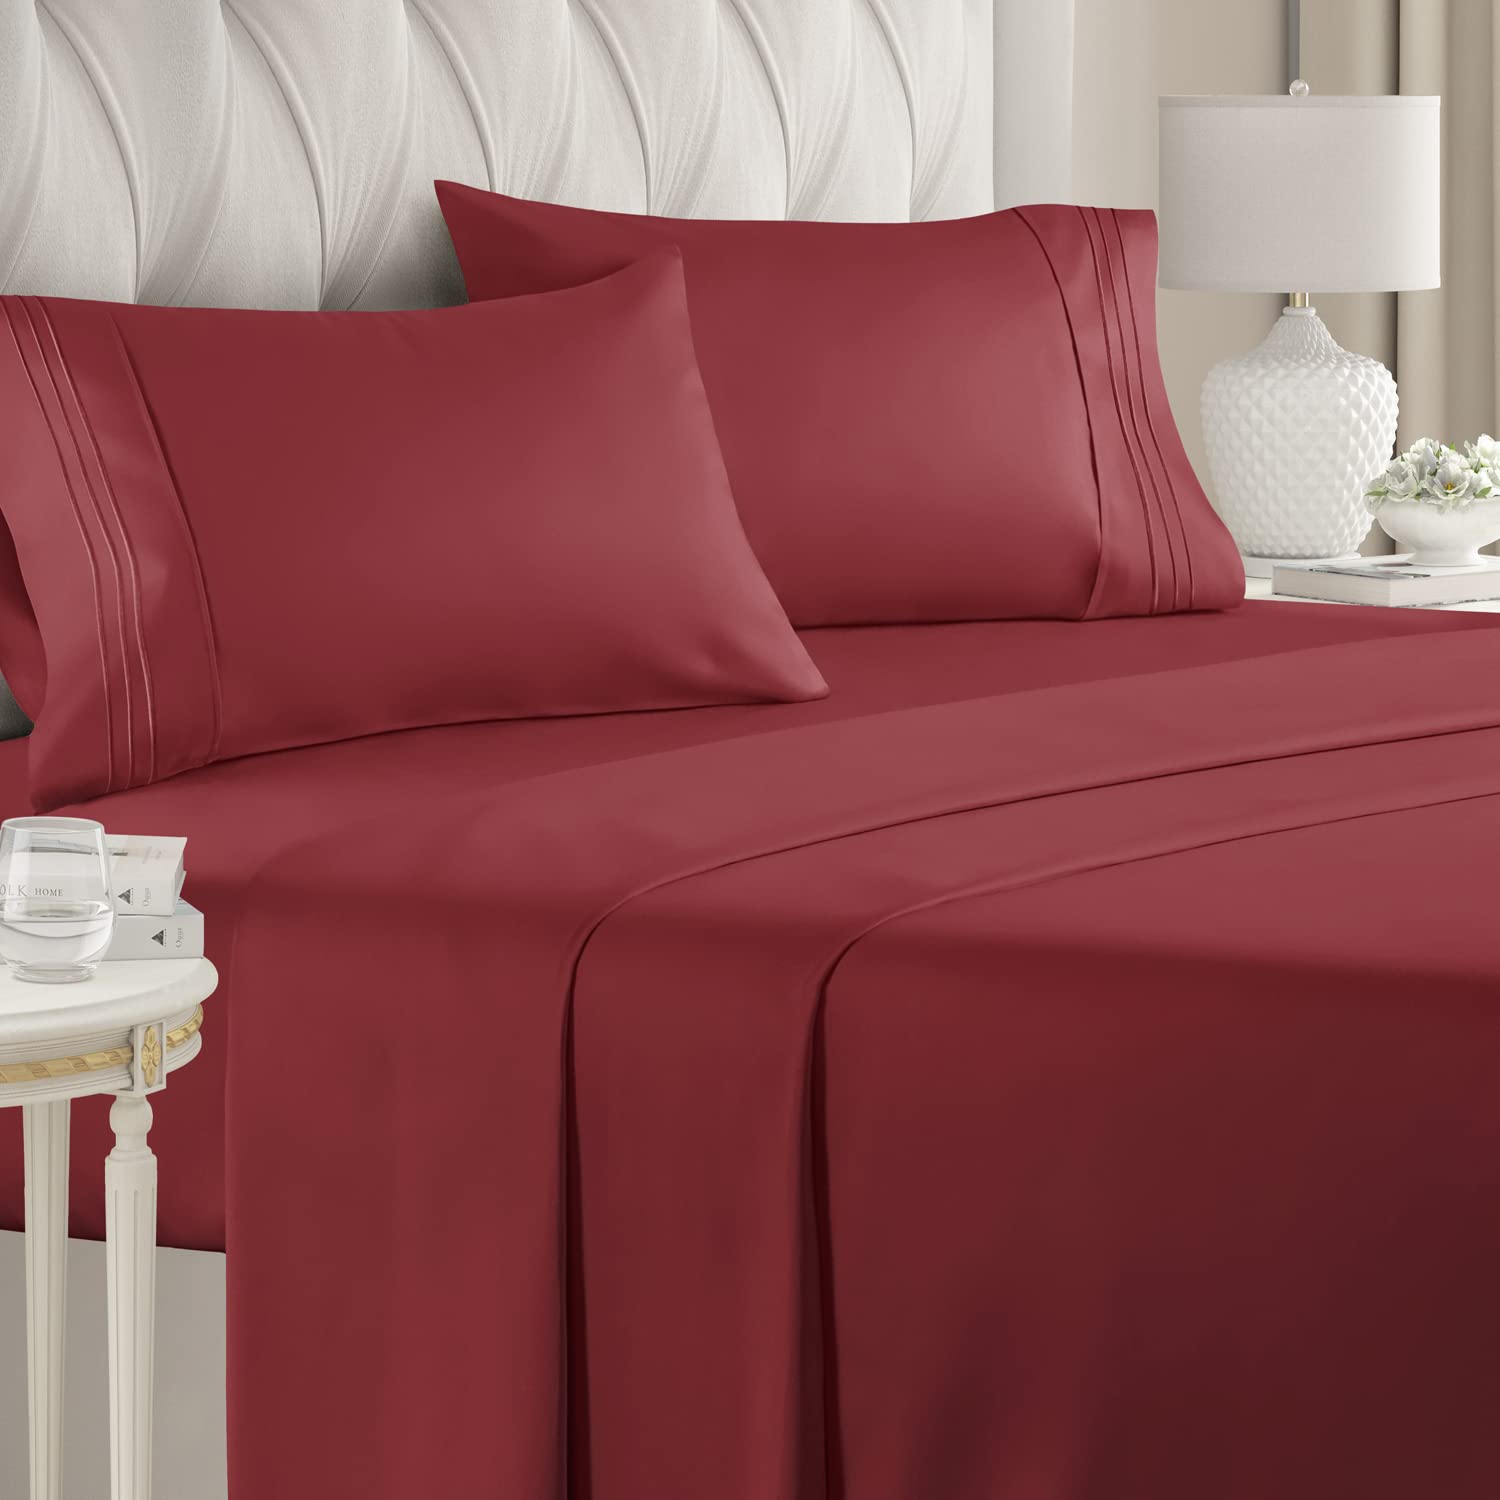 Book Cover Full Size Sheet Set - Breathable & Cooling Sheets - Hotel Luxury Bed Sheets - Extra Soft - Deep Pockets - Easy Fit - 4 Piece Set - Wrinkle Free - Comfy – Burgundy Bed Sheets - Fulls Sheets – 4 PC 26 - Burgundy Full